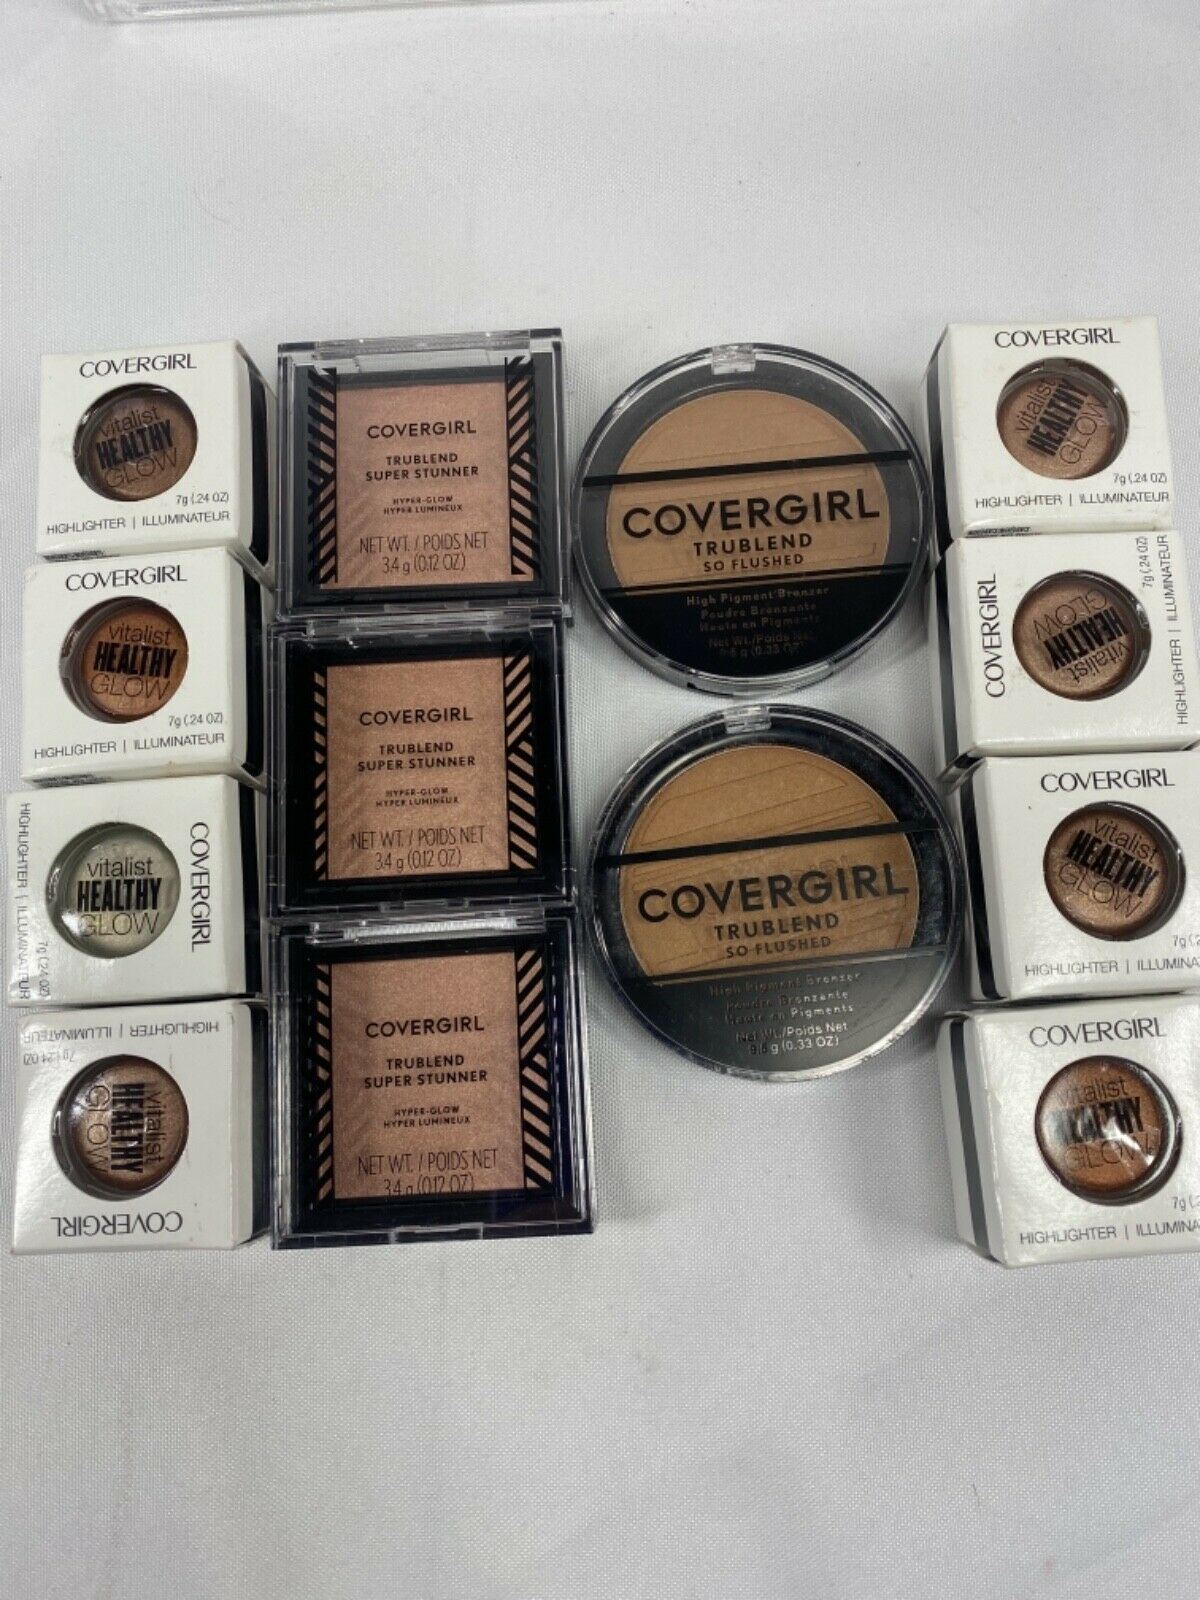 Covergirl Highlighter Healthy Glow U CHOOSE Buy More & Save + Combined Shipping - $2.10 - $2.57